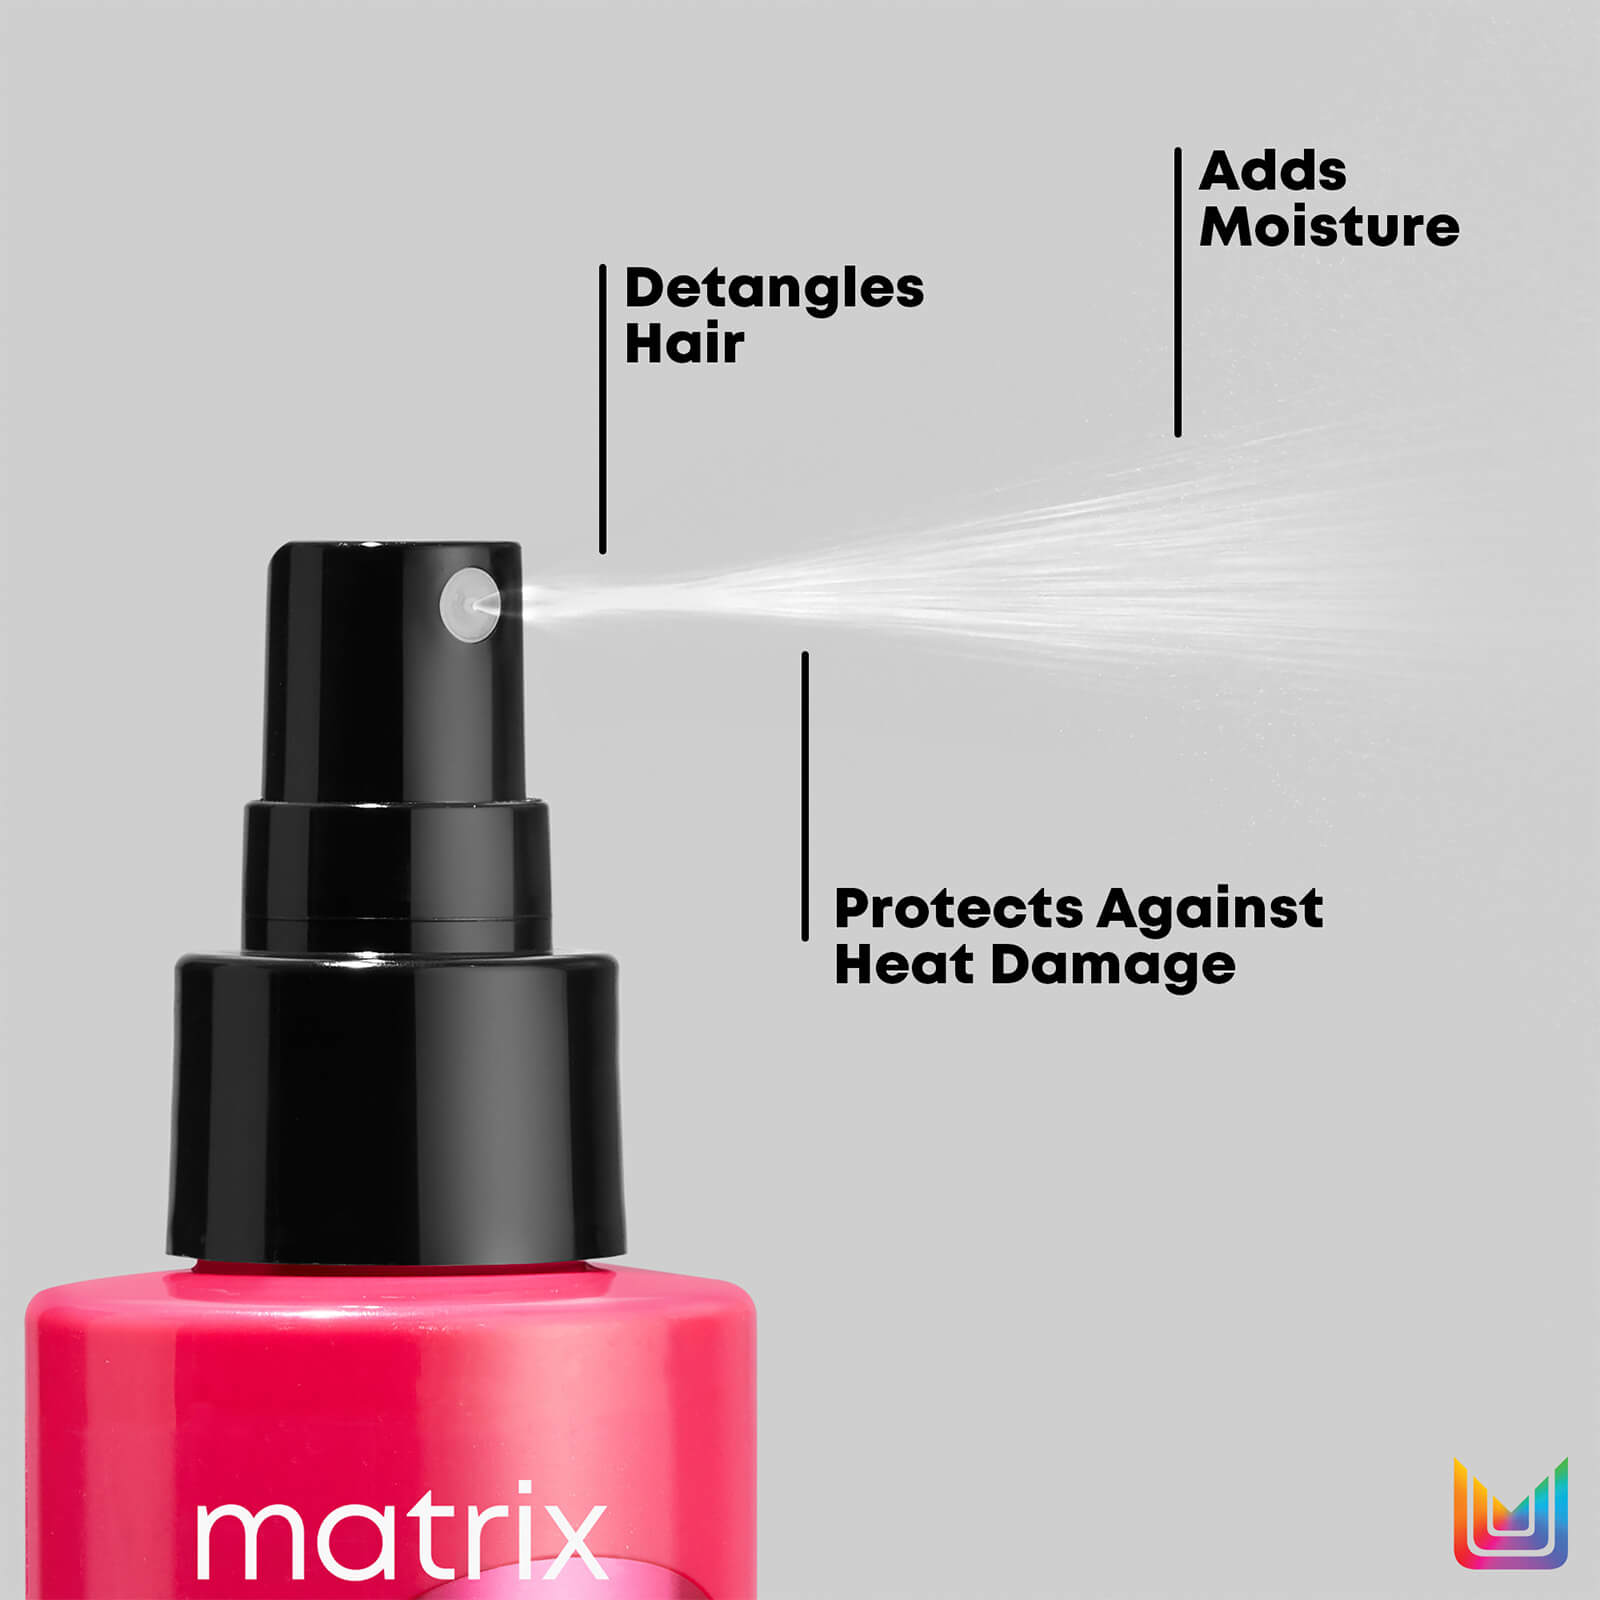 Detangles hair, adds moisture, and protects against heat damage